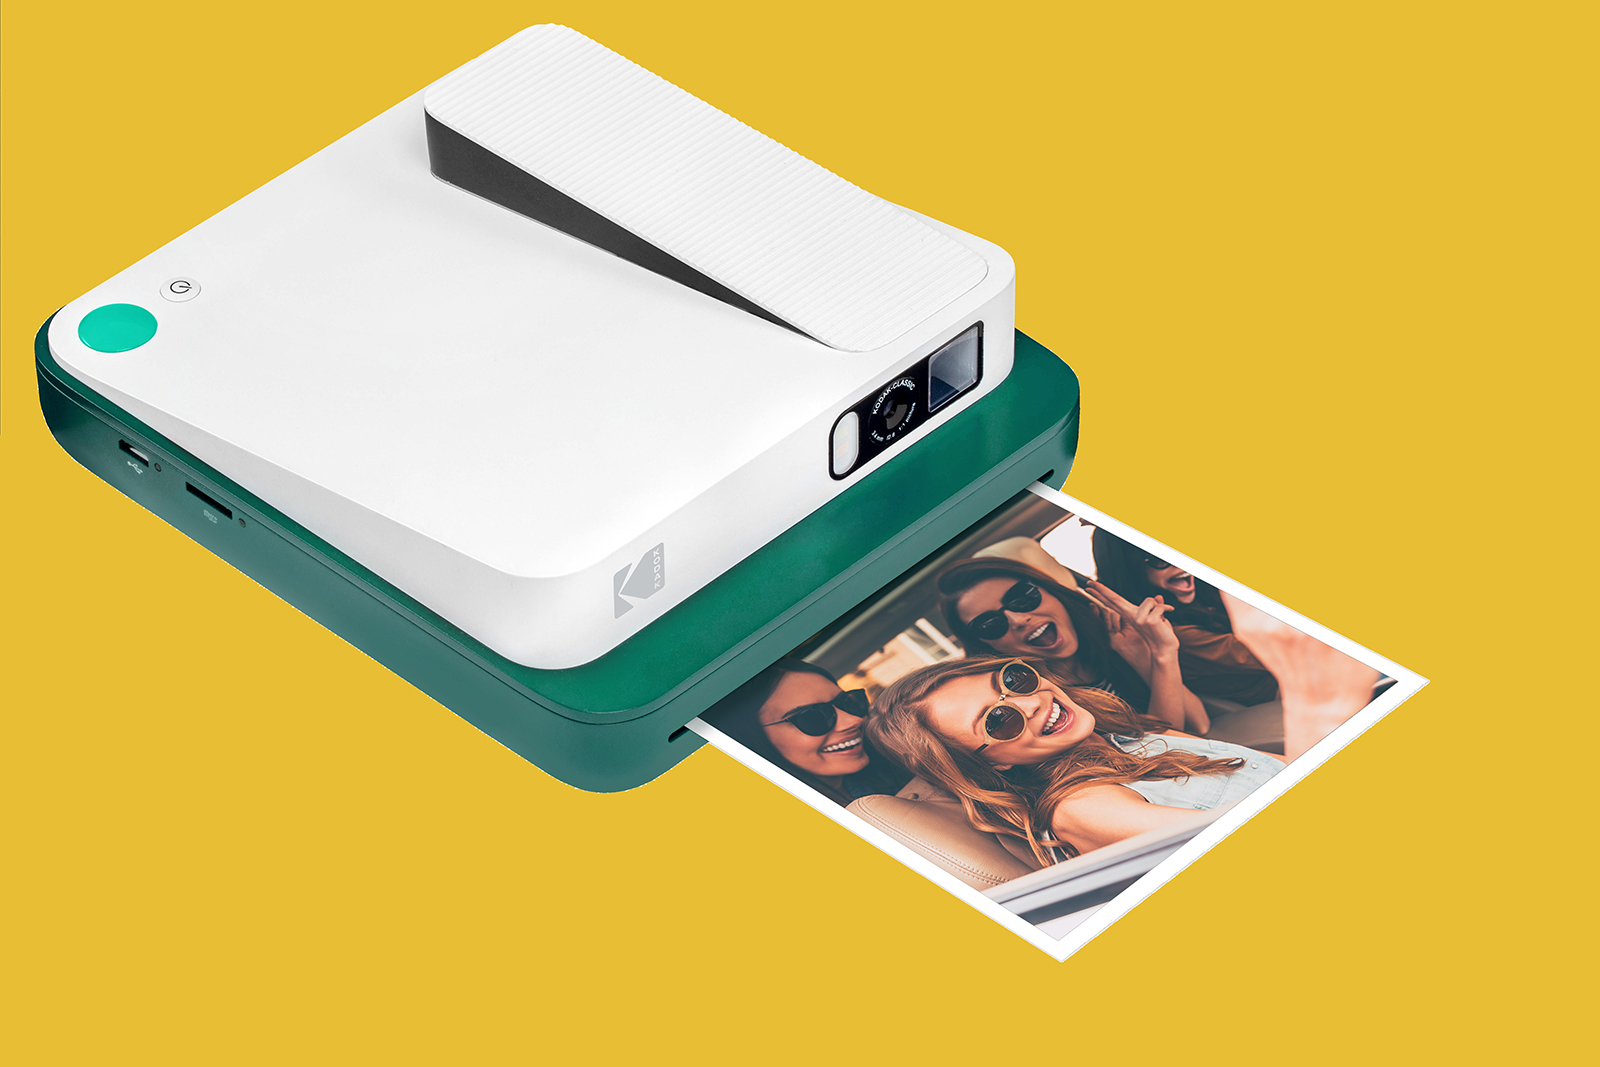 Kodak Smile Classic Review: The Best Zink Instant Camera